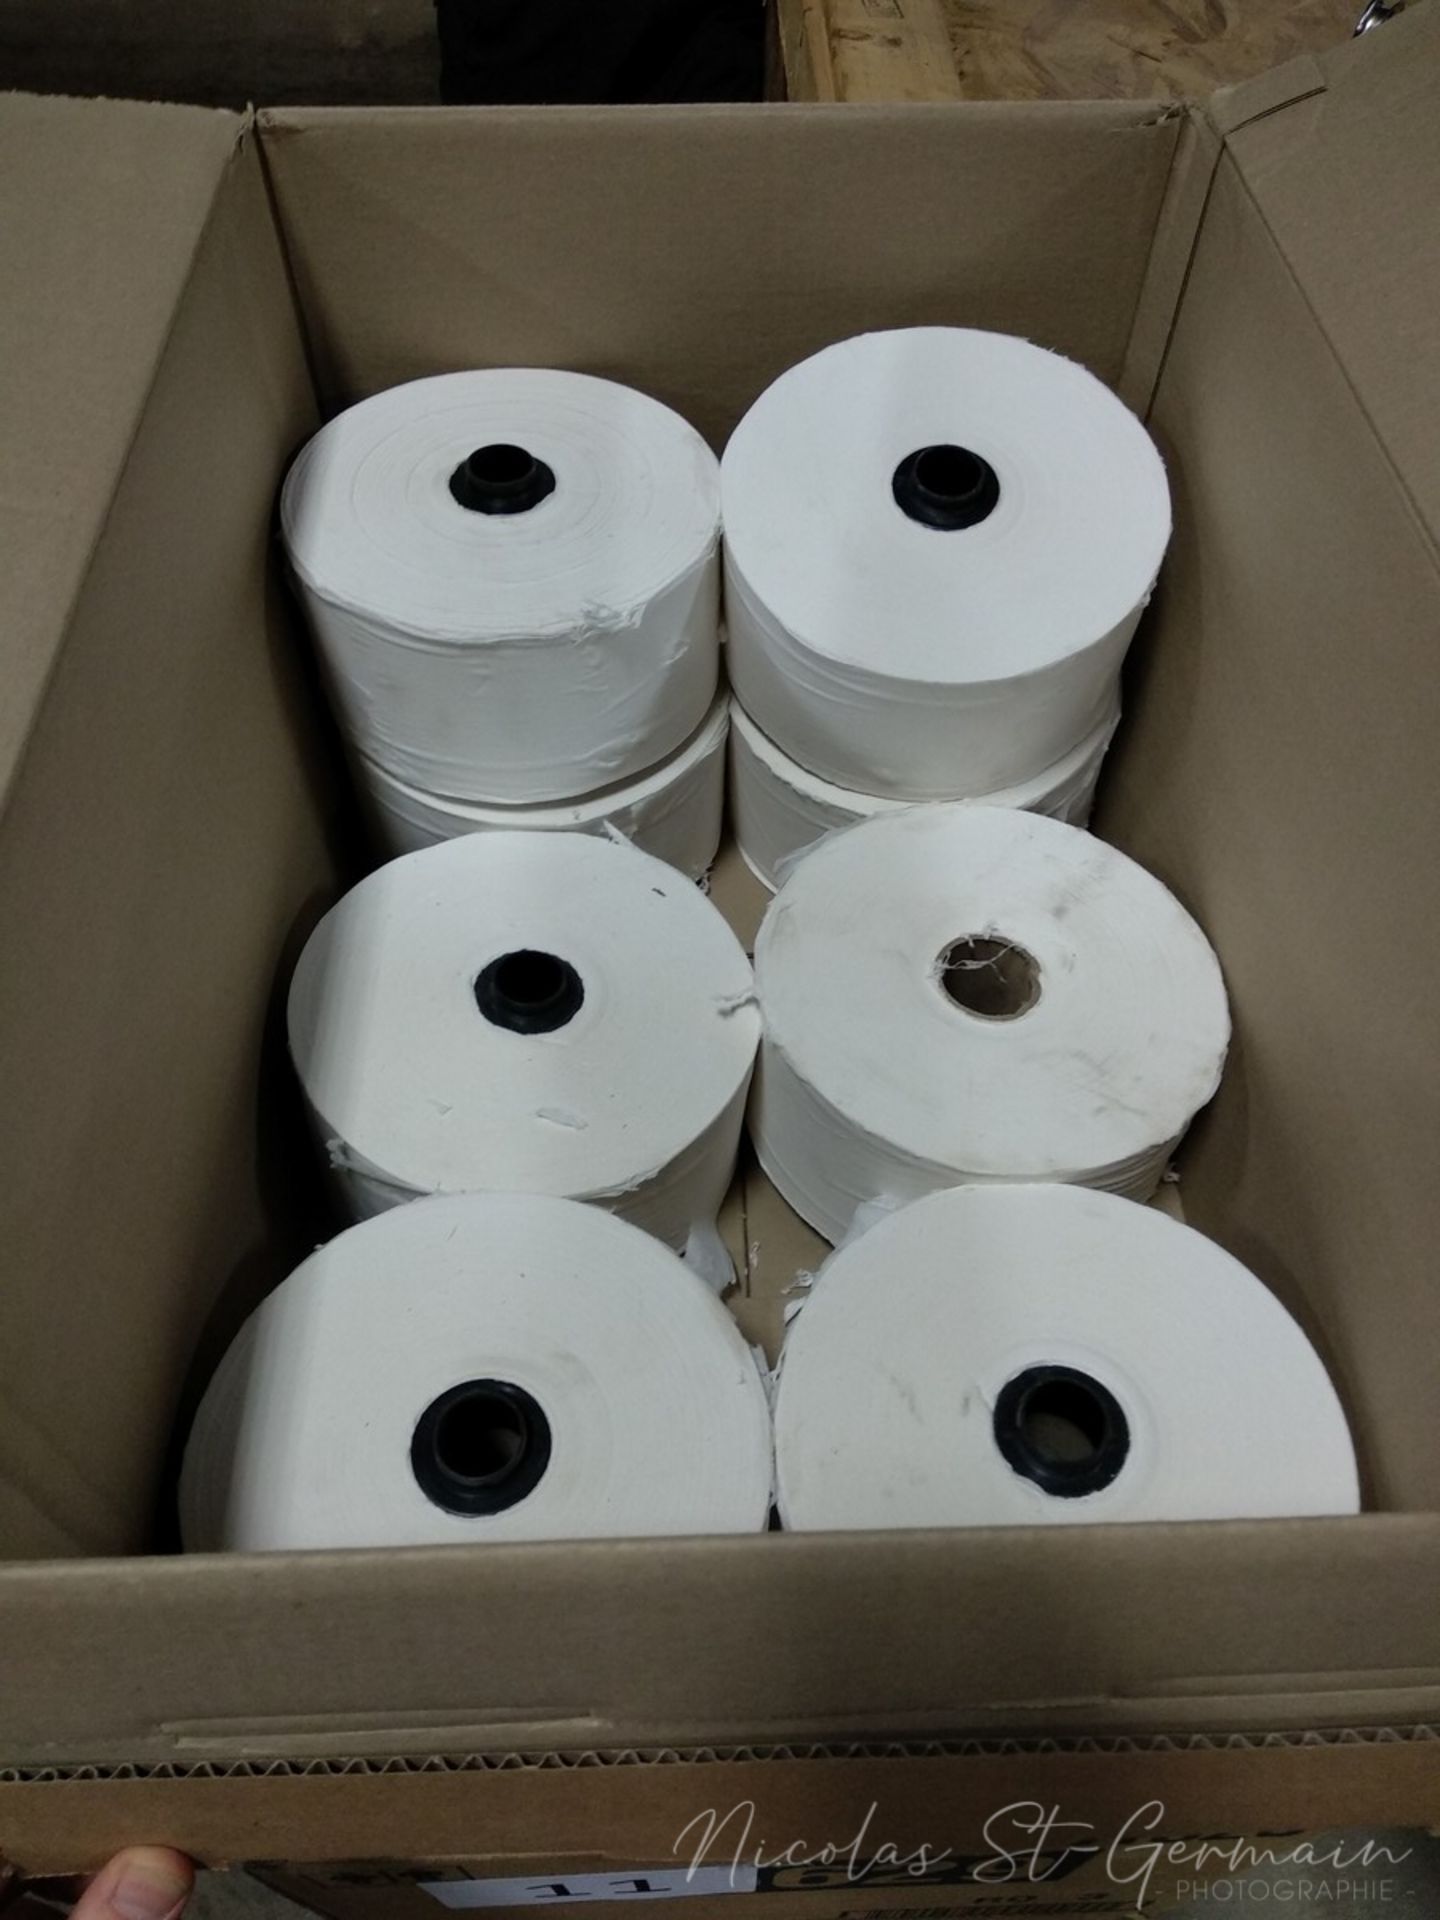 Washroom Supplies: Toilet Paper, Toilet Paper Dispensers - Image 3 of 6